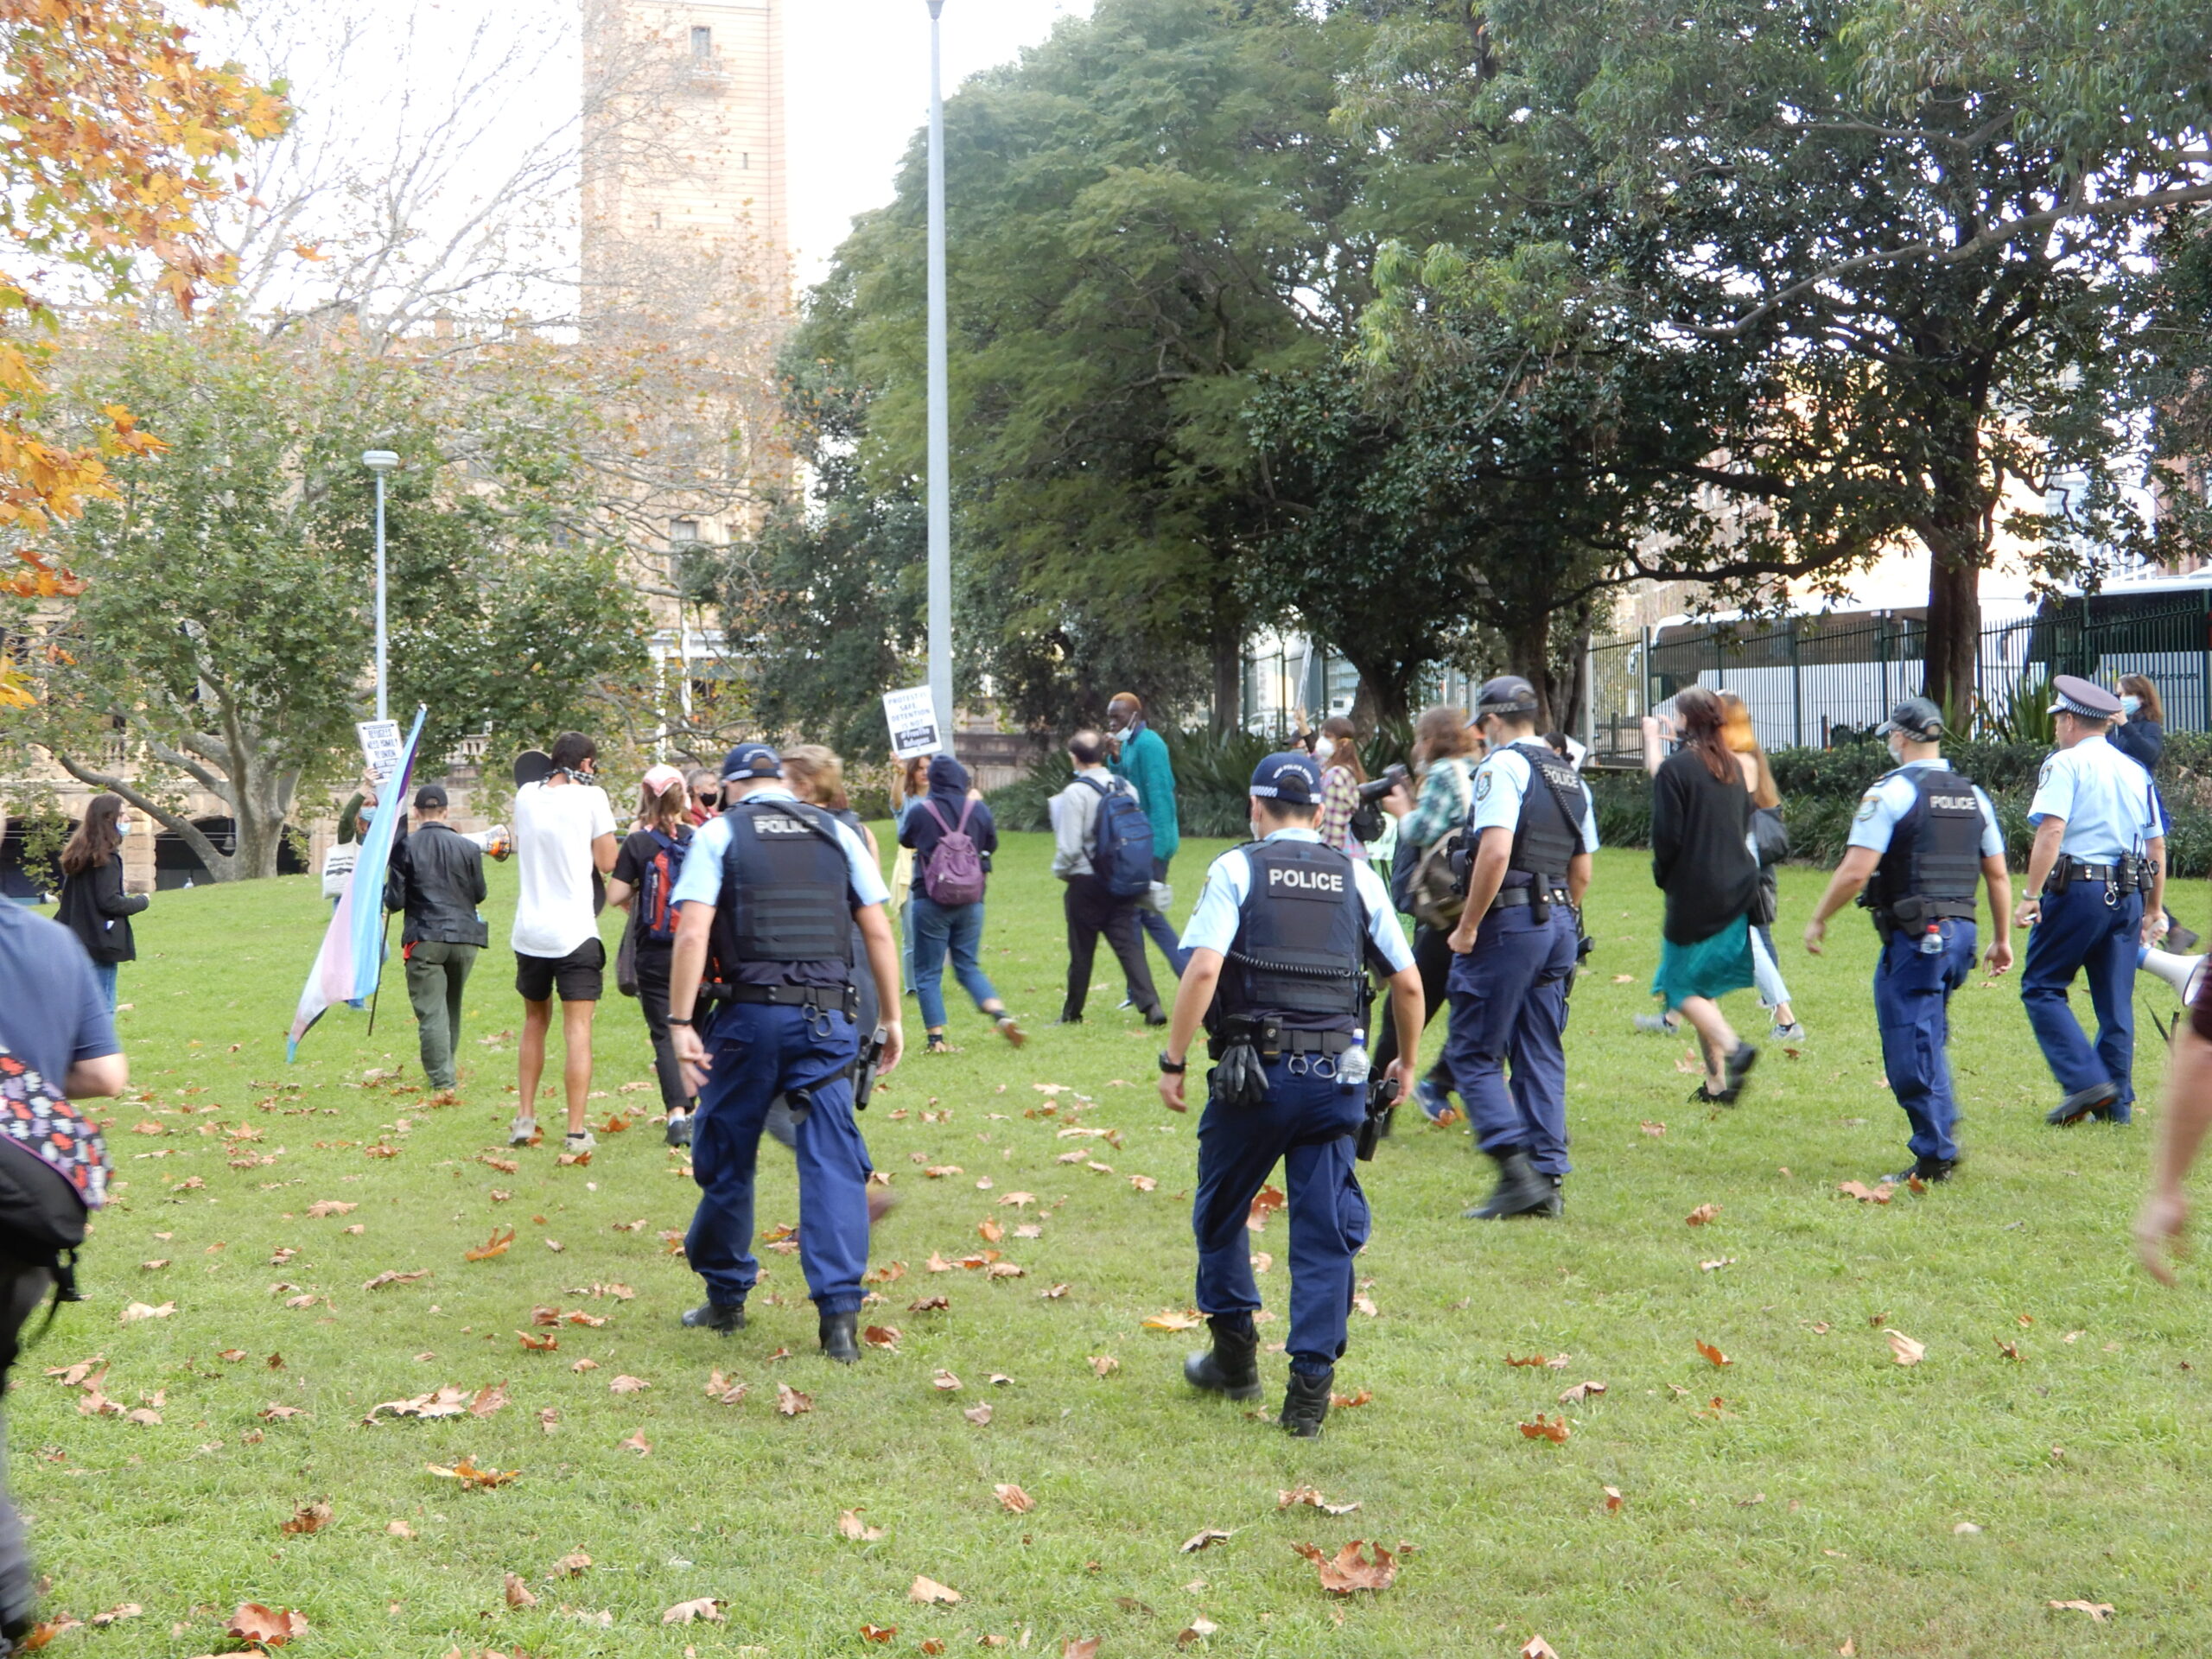 Officers tailing refugee march in Belmore Park on 13 June 2020